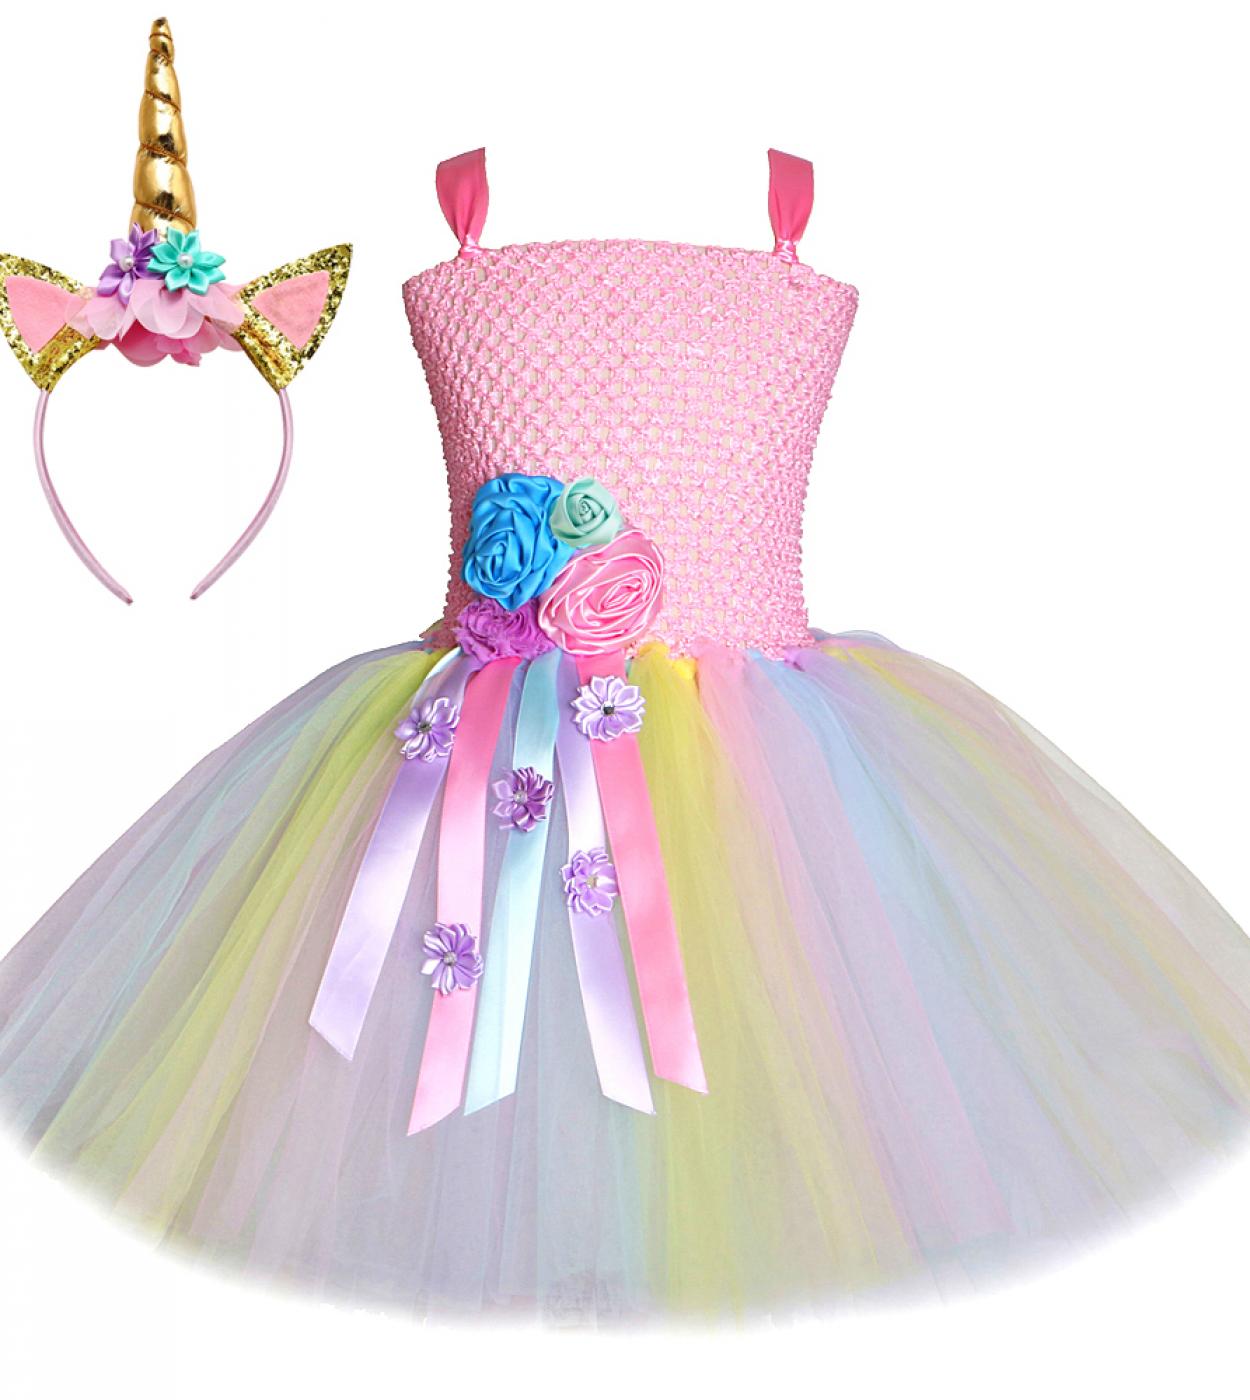 Pink Pastel Flower Girl Unicorn Dress Kids Tutu Costume Outfit For Halloween Birthday Party Princess Dresses With Horns 